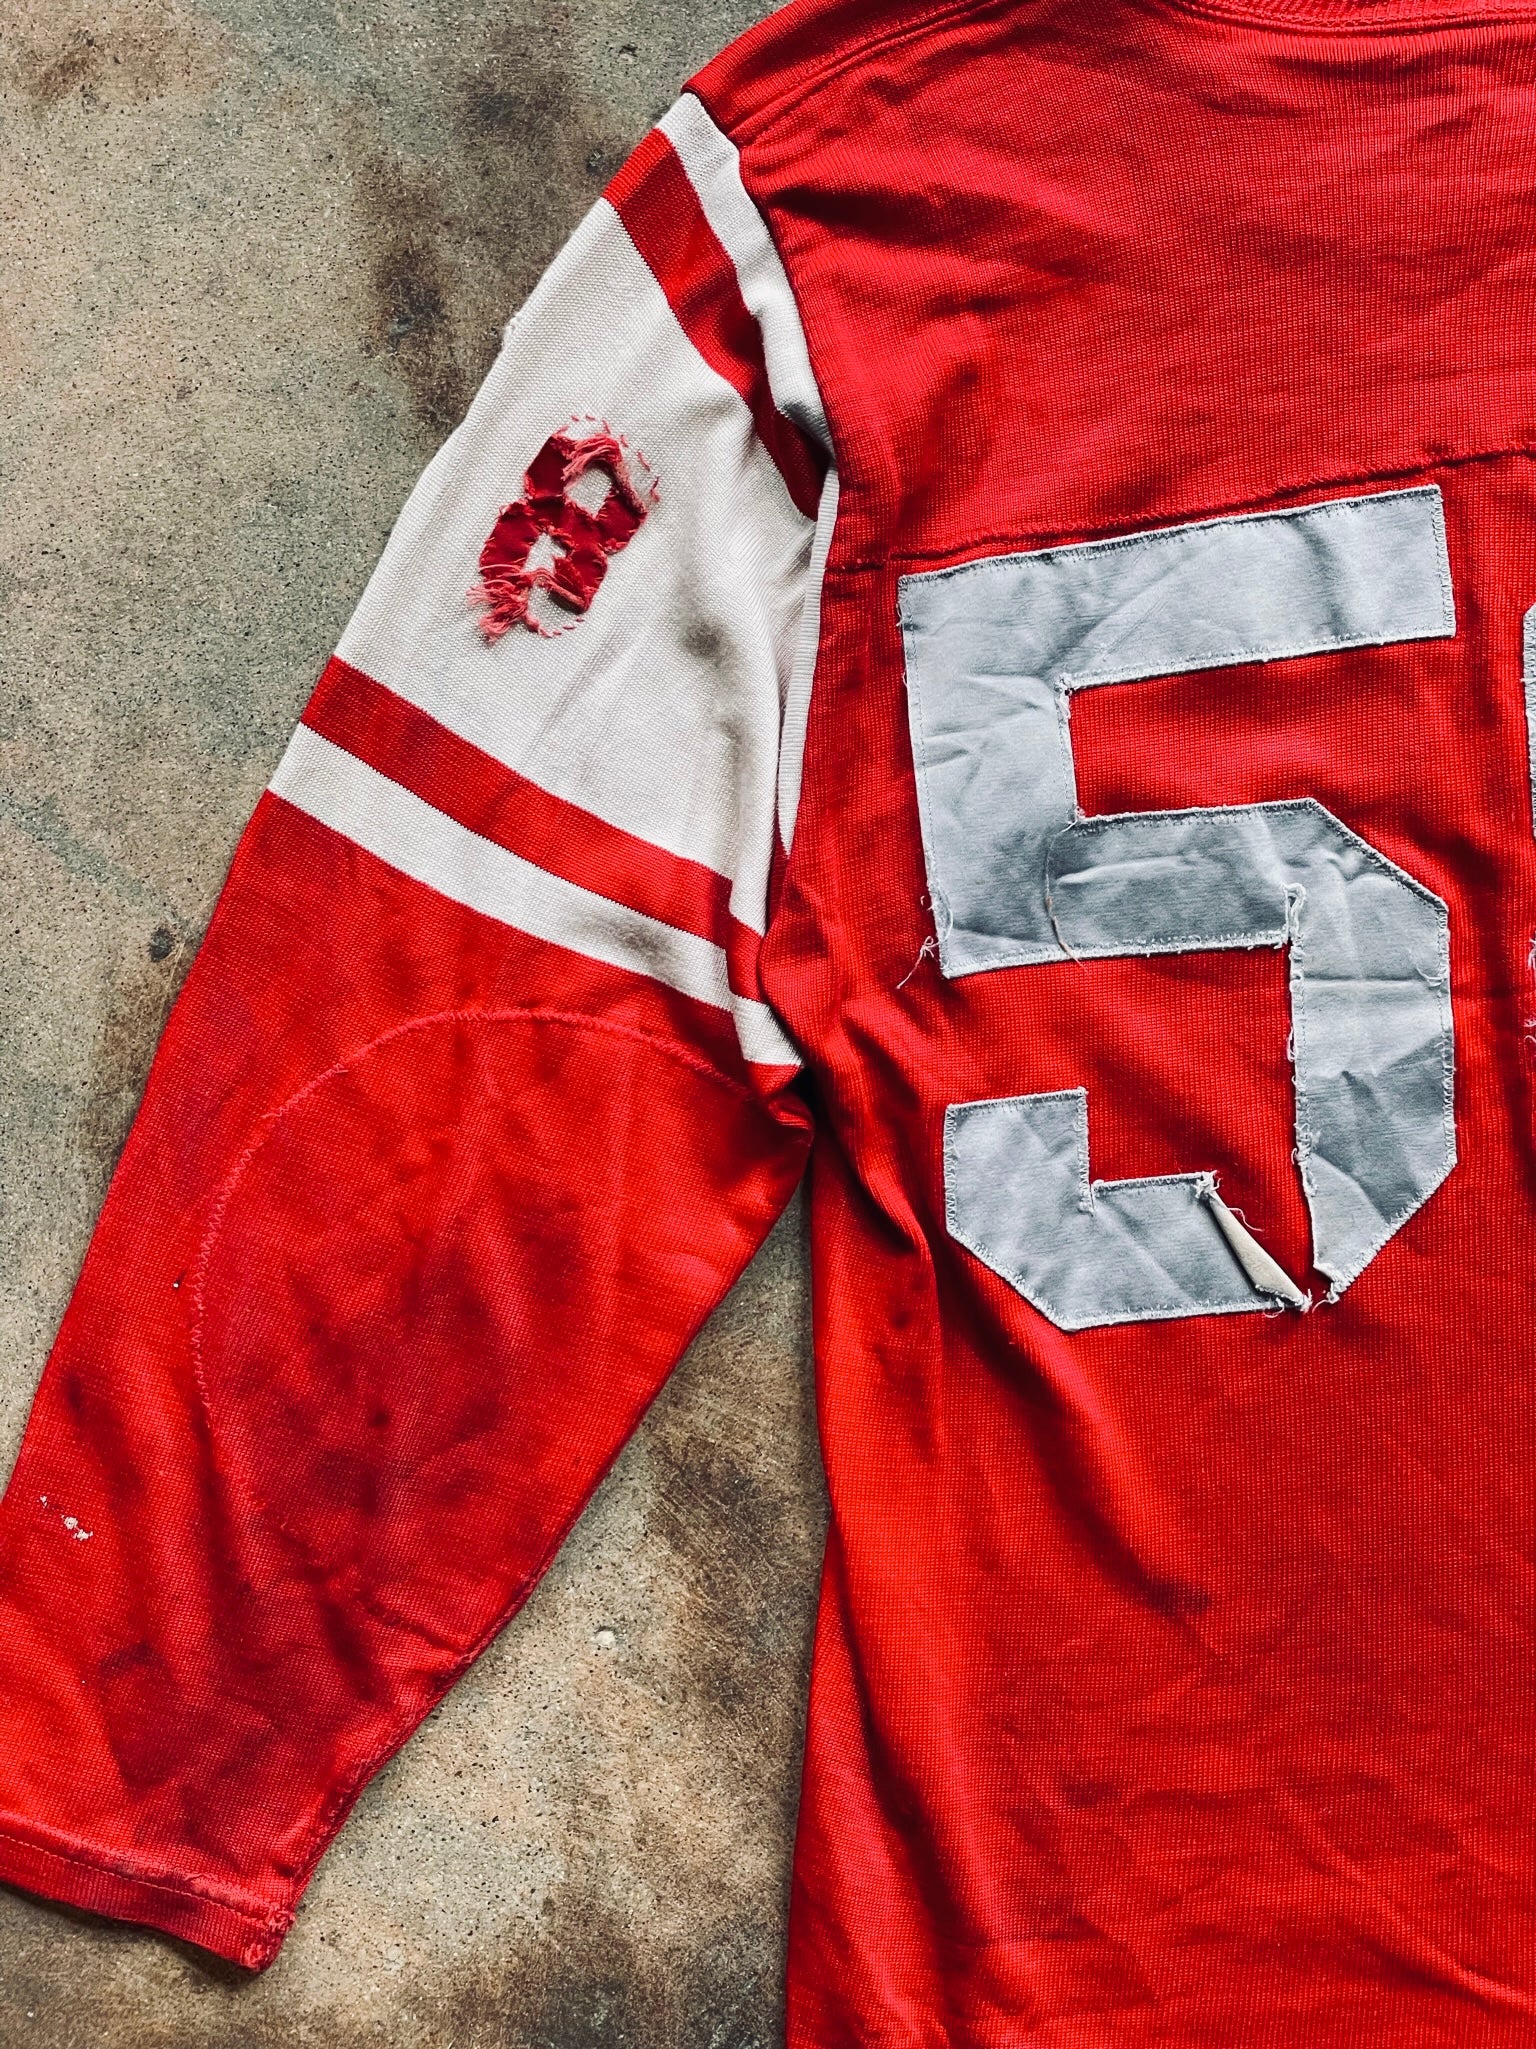 1960’s Football Jersey #58 | Large